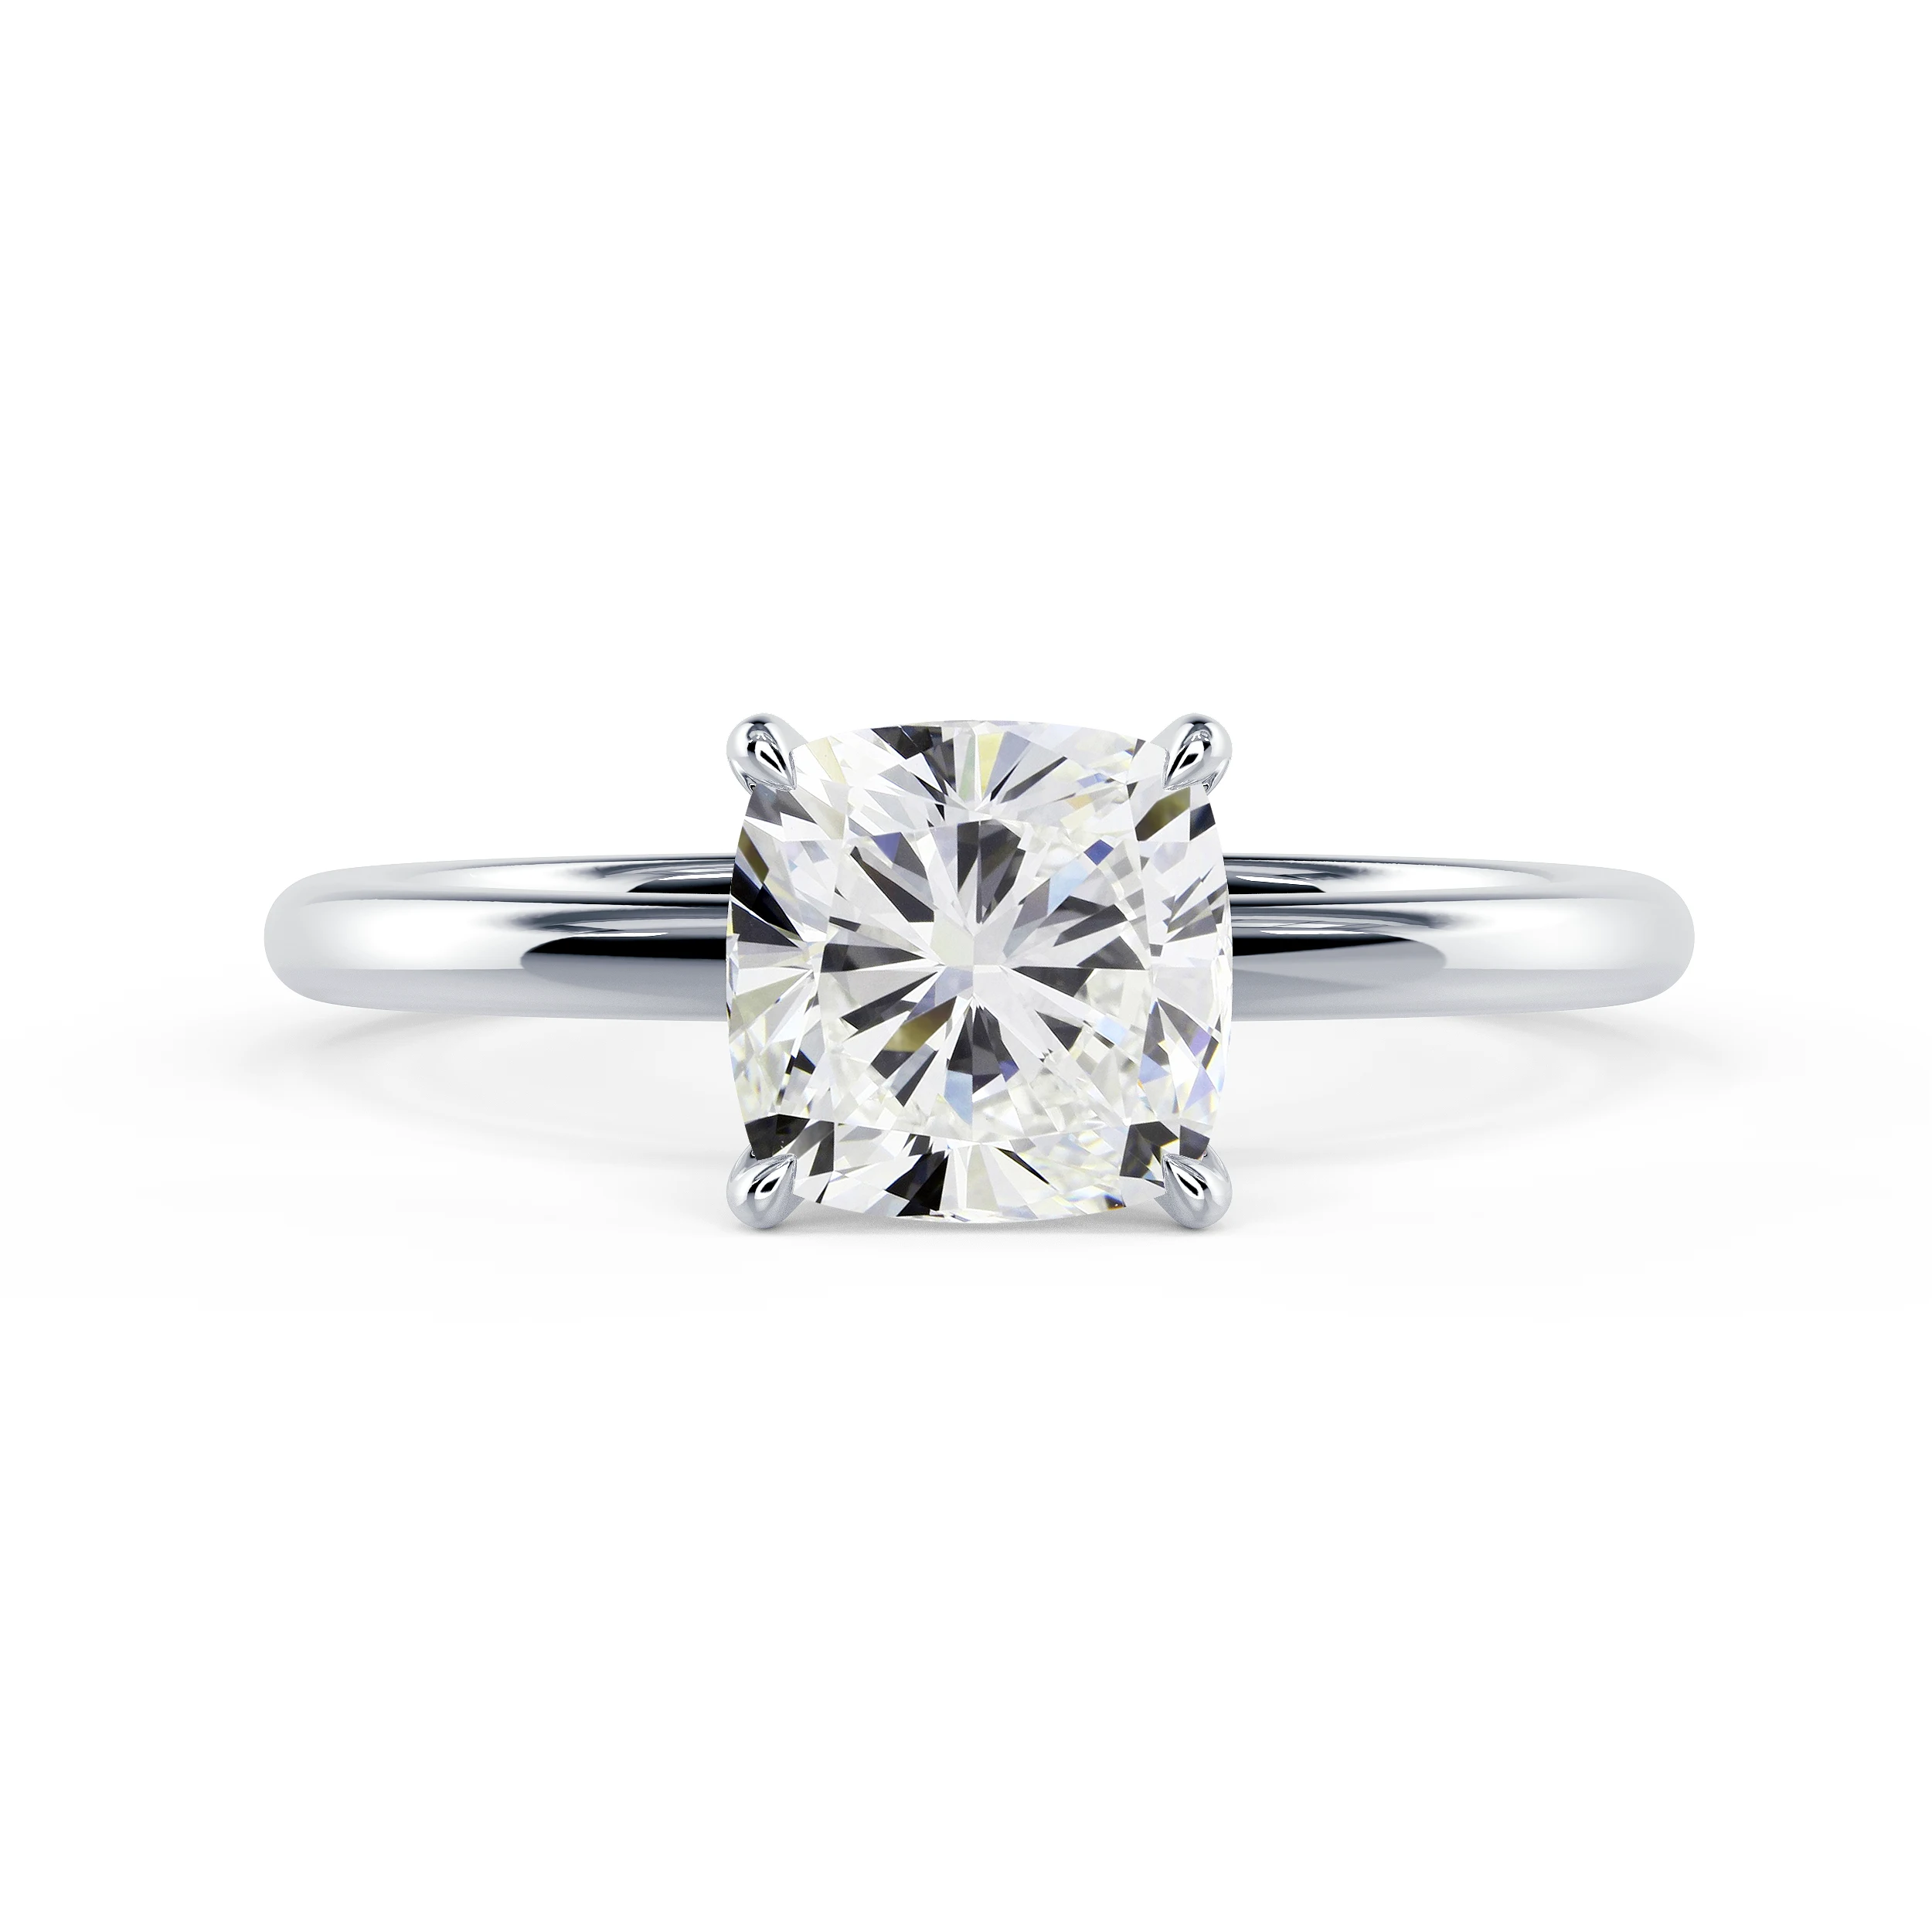 High Quality Lab Grown Diamonds set in White Gold Cushion Classic Four Prong Solitaire Diamond Engagement Ring (Main View)